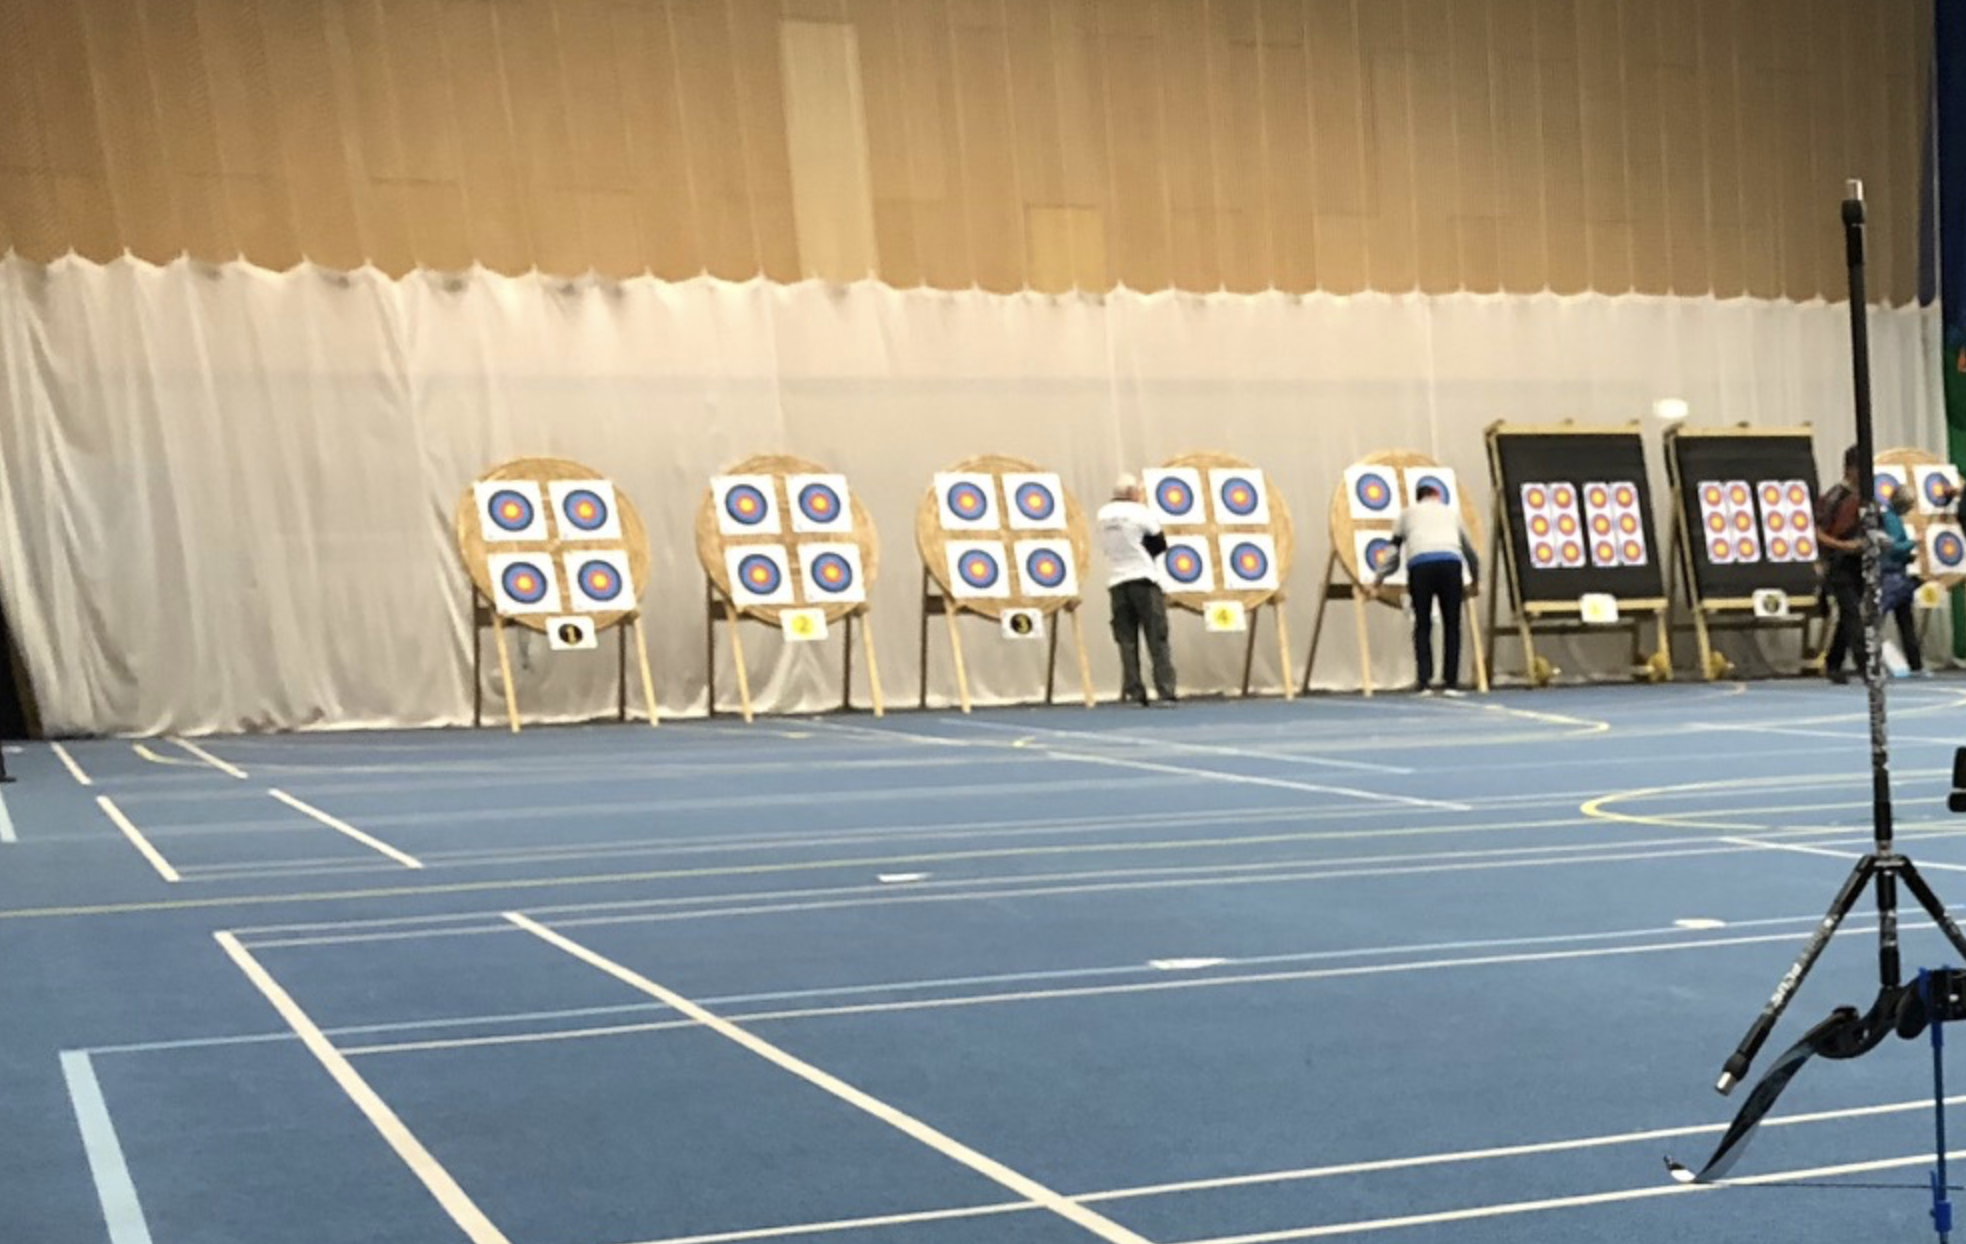 Indoor Archery at the King's Centre